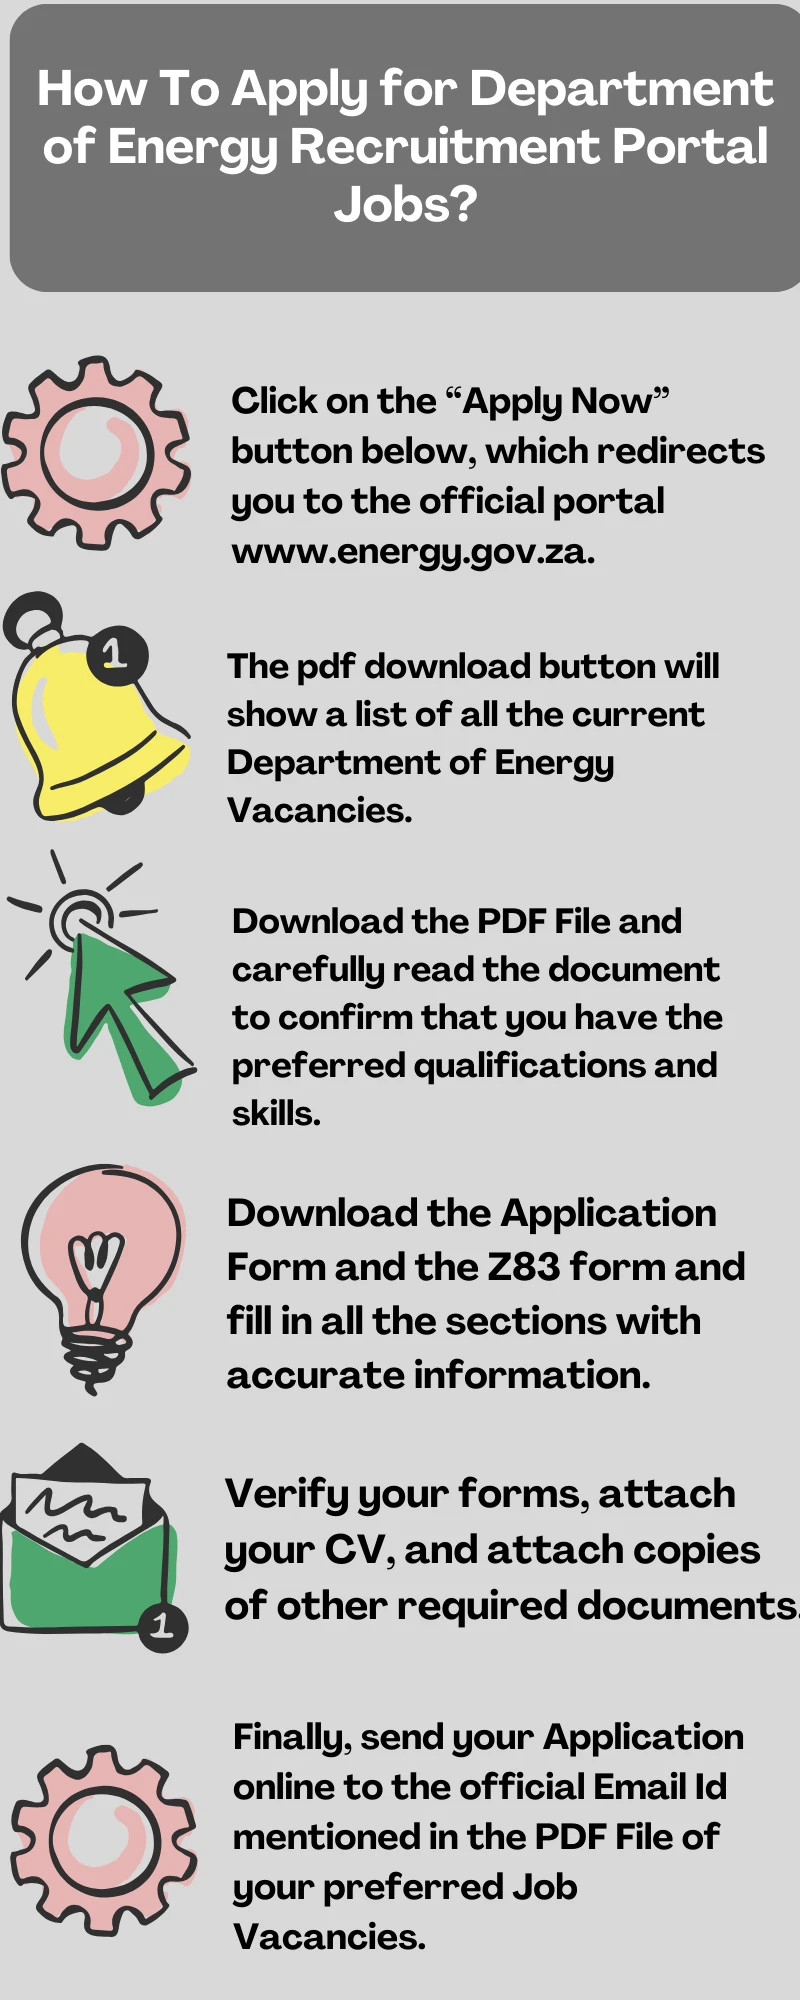 How To Apply for Department of Energy Recruitment Portal Jobs?